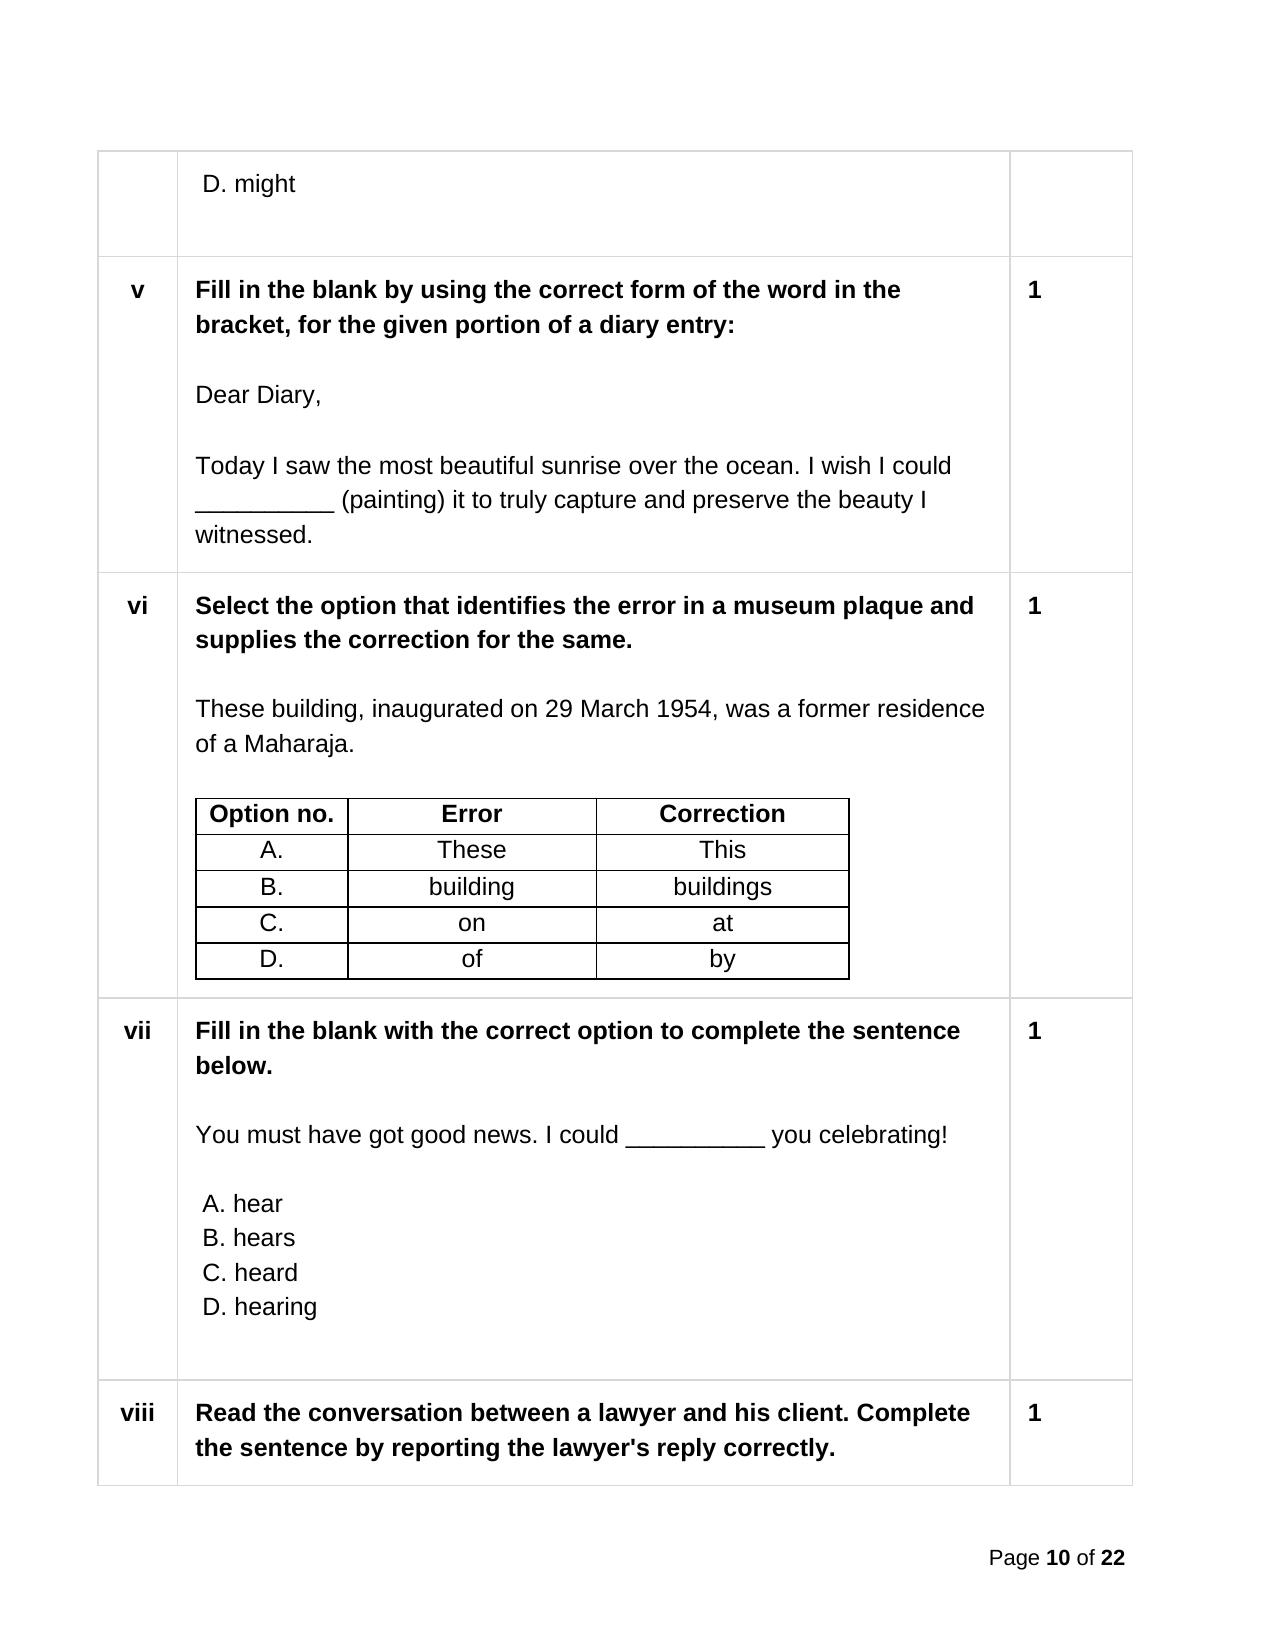 CBSE Class 10 English Practice Questions 2022-23 - Page 10